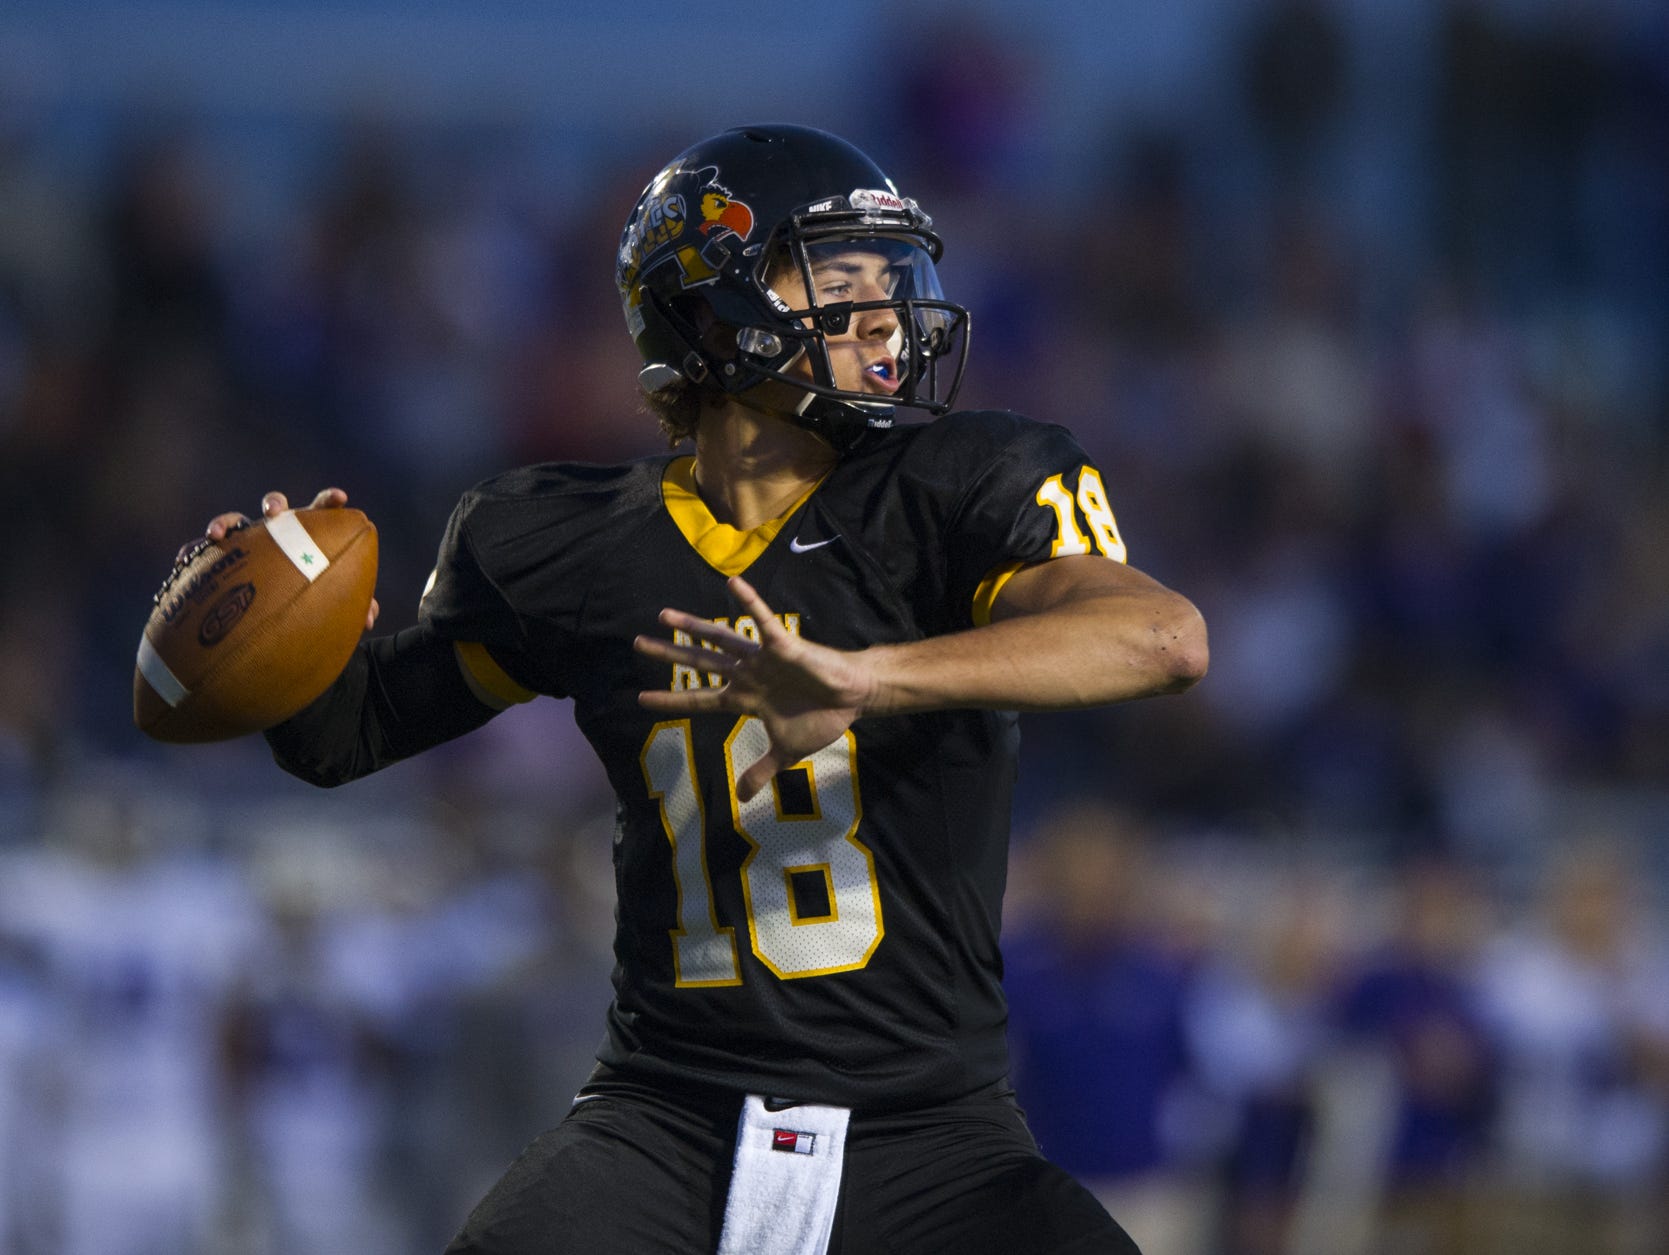 Avon QB and IndyStar Mr. Football Brandon Peters is already taking classes at Michigan.